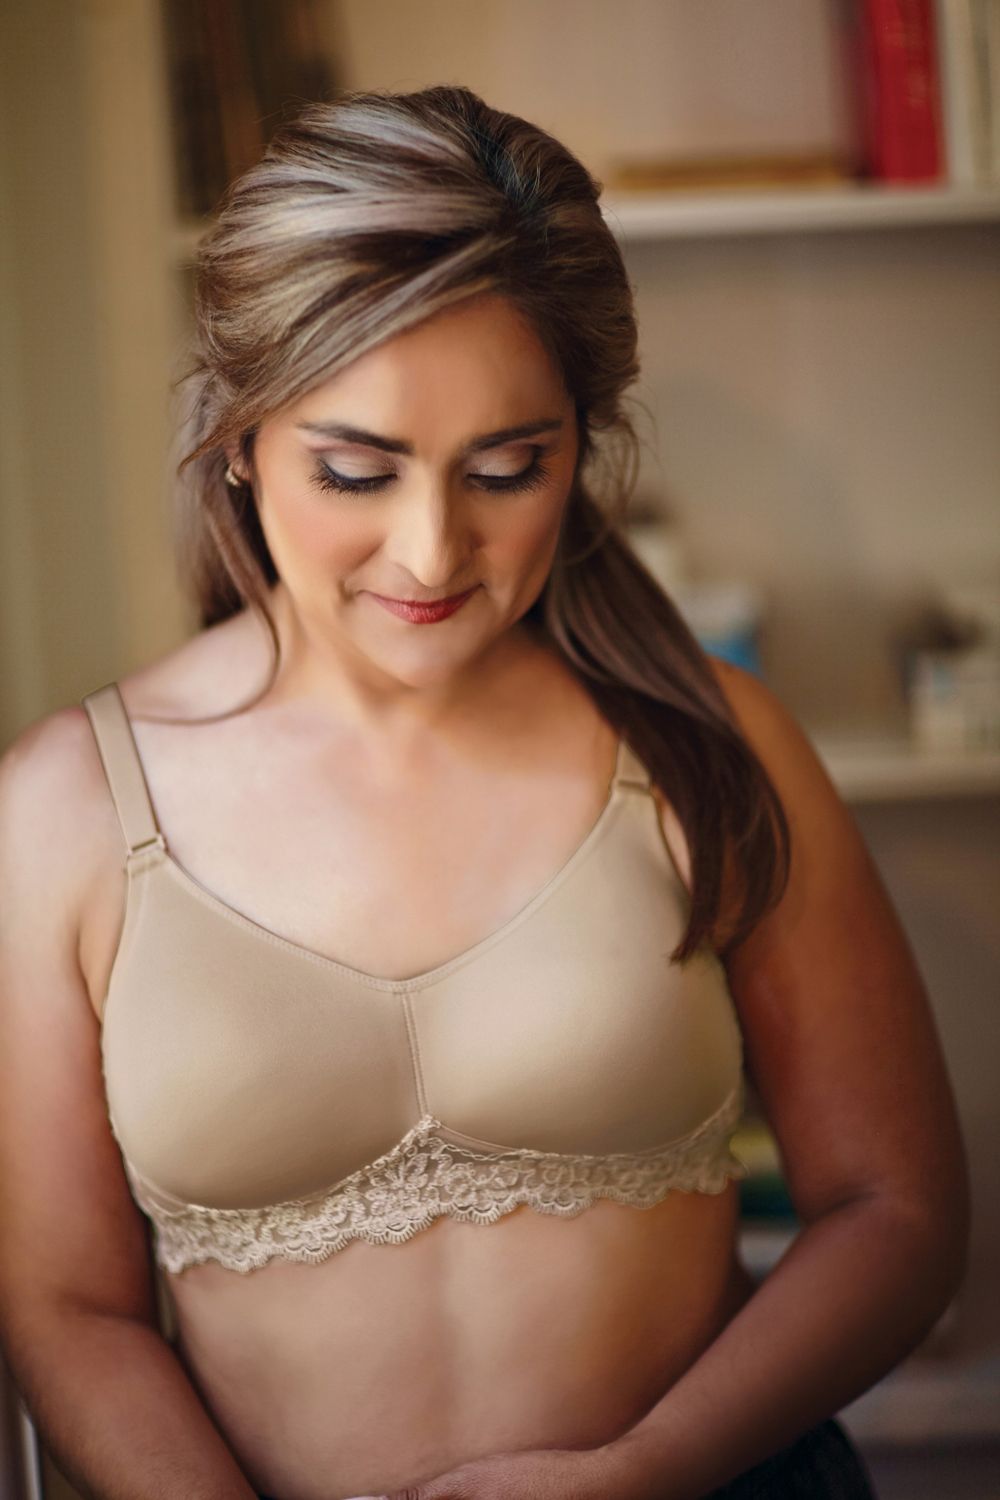 America Breast Care Breast Forms - ABC Breast Prosthesis, ABC Mastectomy Bra